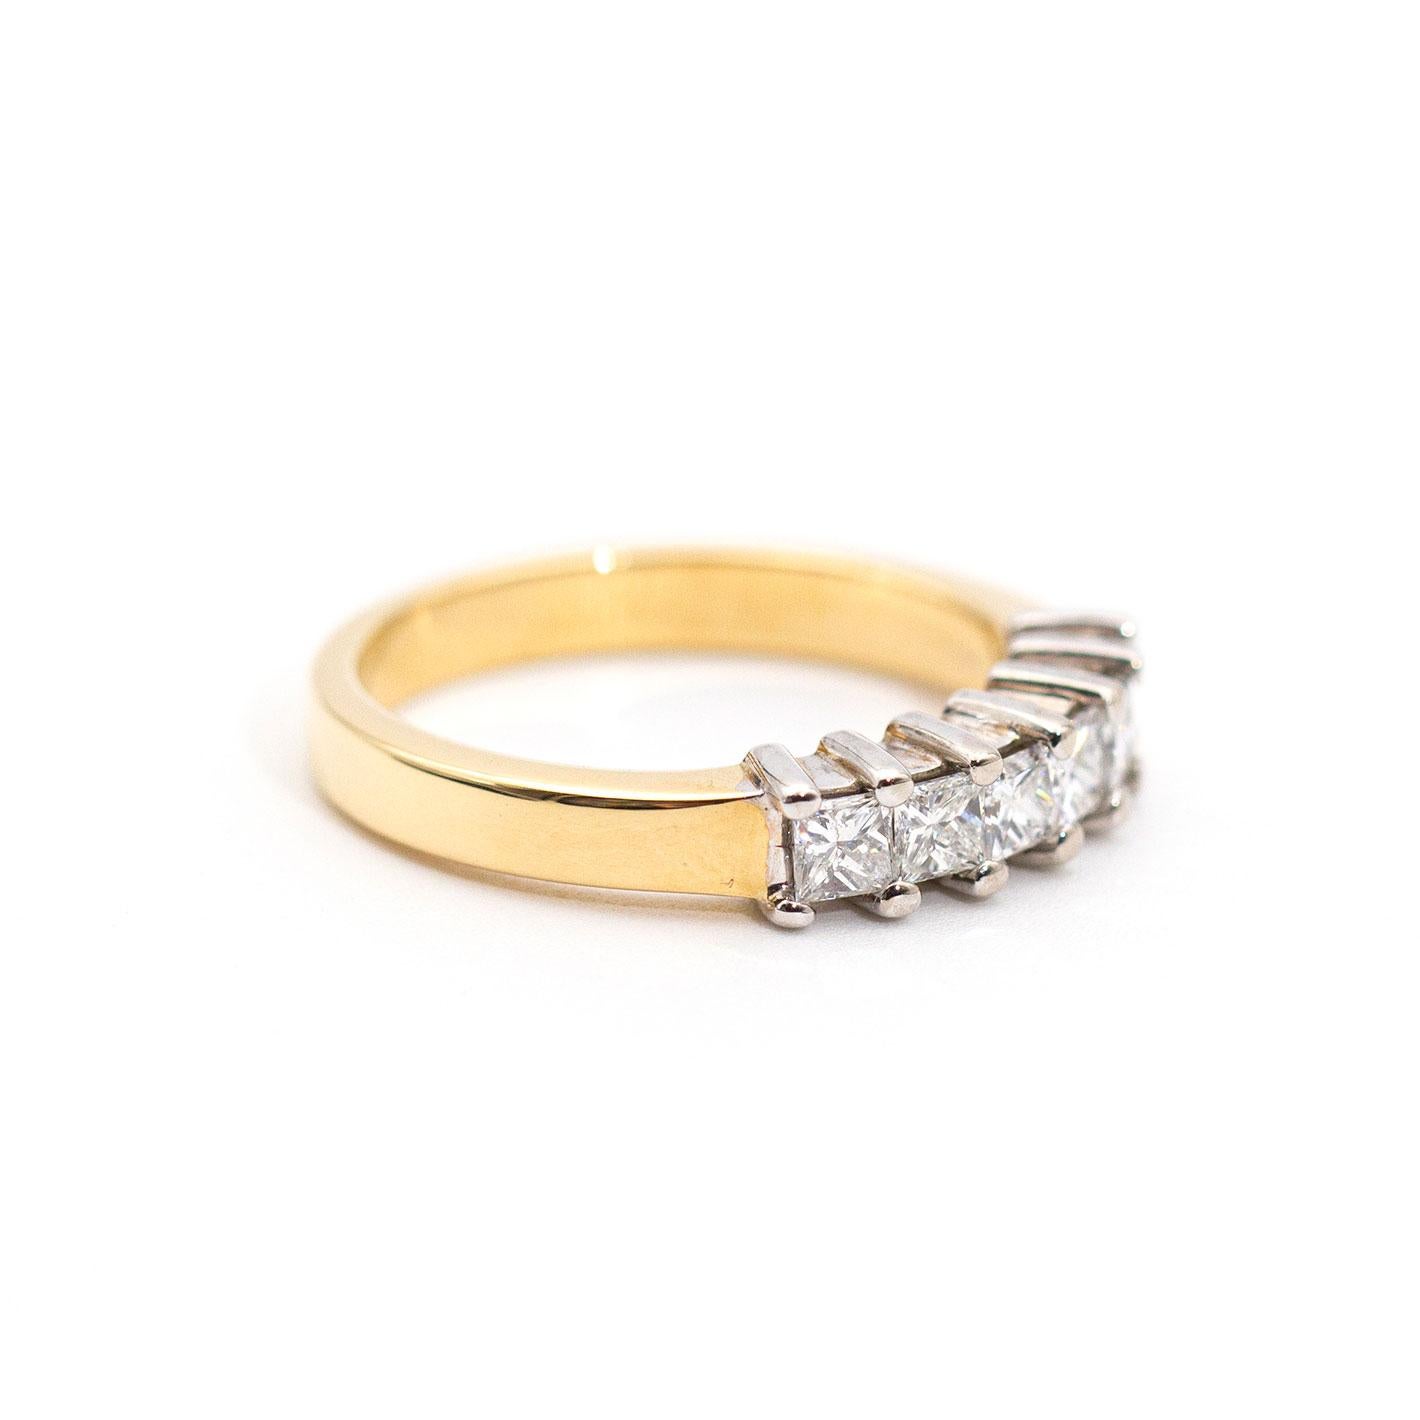 Forged in 18 carat yellow and white gold is this lovely eternity ring featuring a row of six bright princess cut diamonds. We have named this modern vintage piece The Mckenna Ring.  The McKenna Ring is perfect by herself or layer her up with other